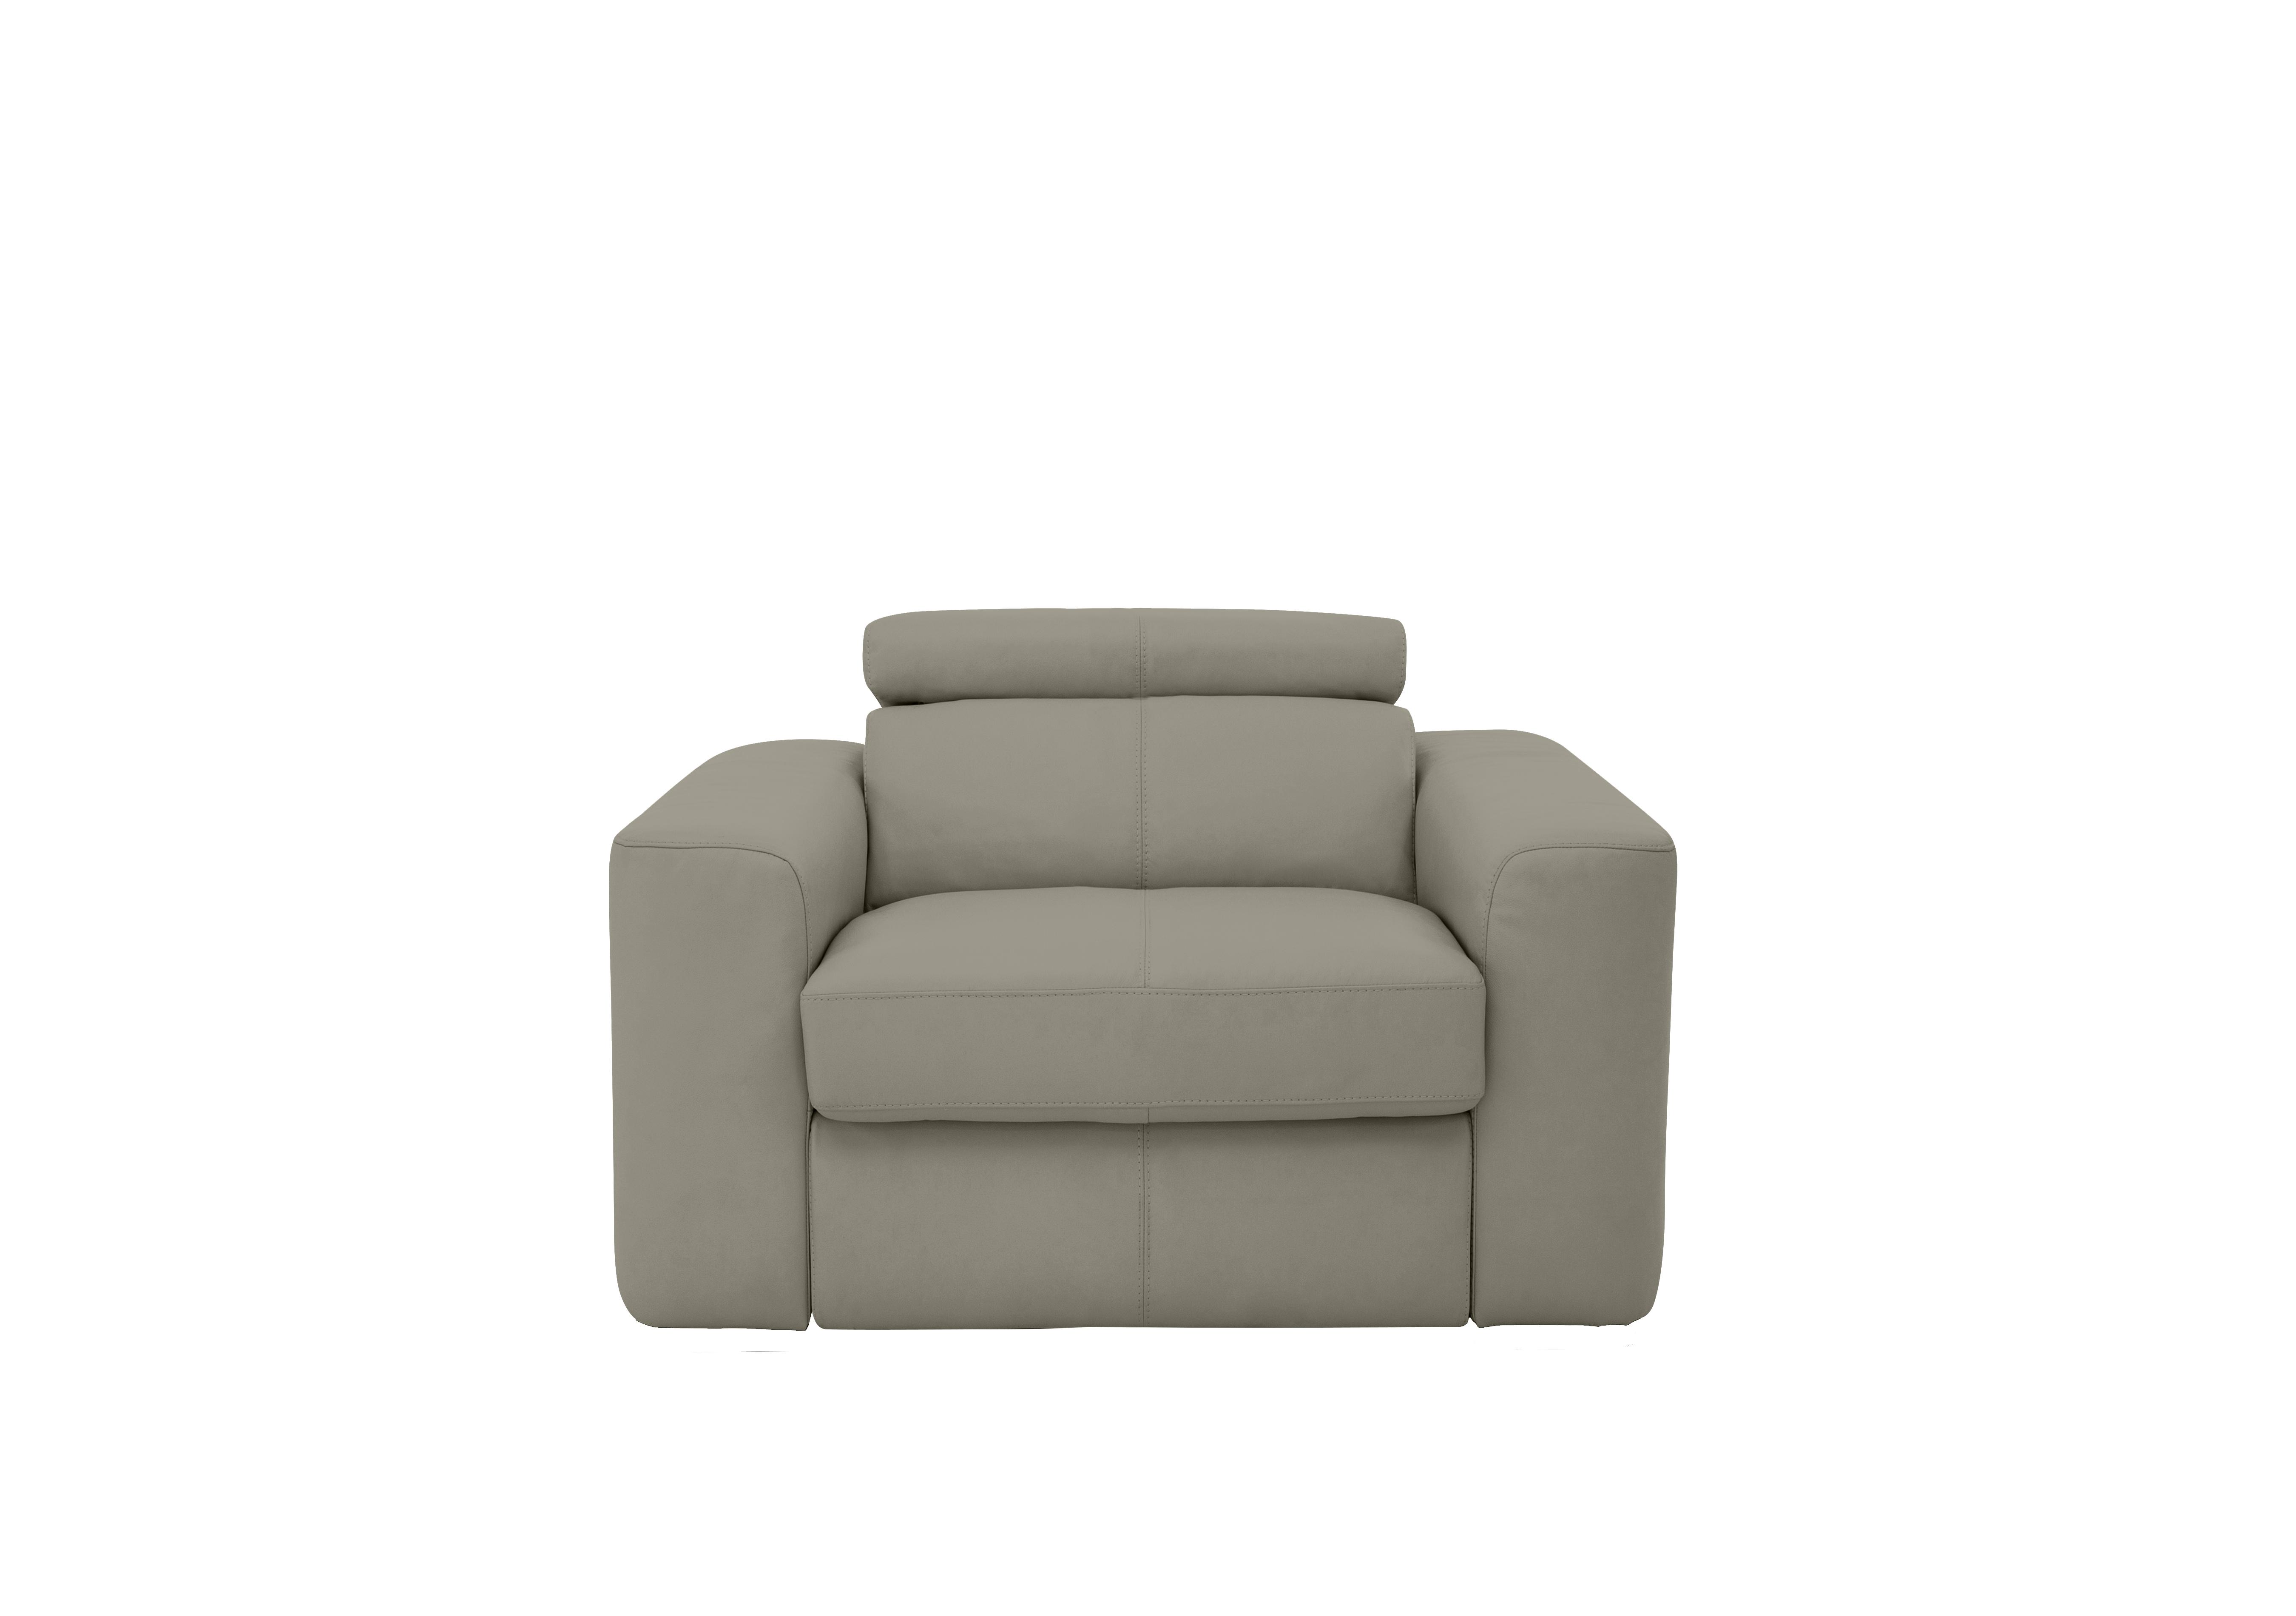 Infinity Leather Armchair in Bv-946b Silver Grey on Furniture Village